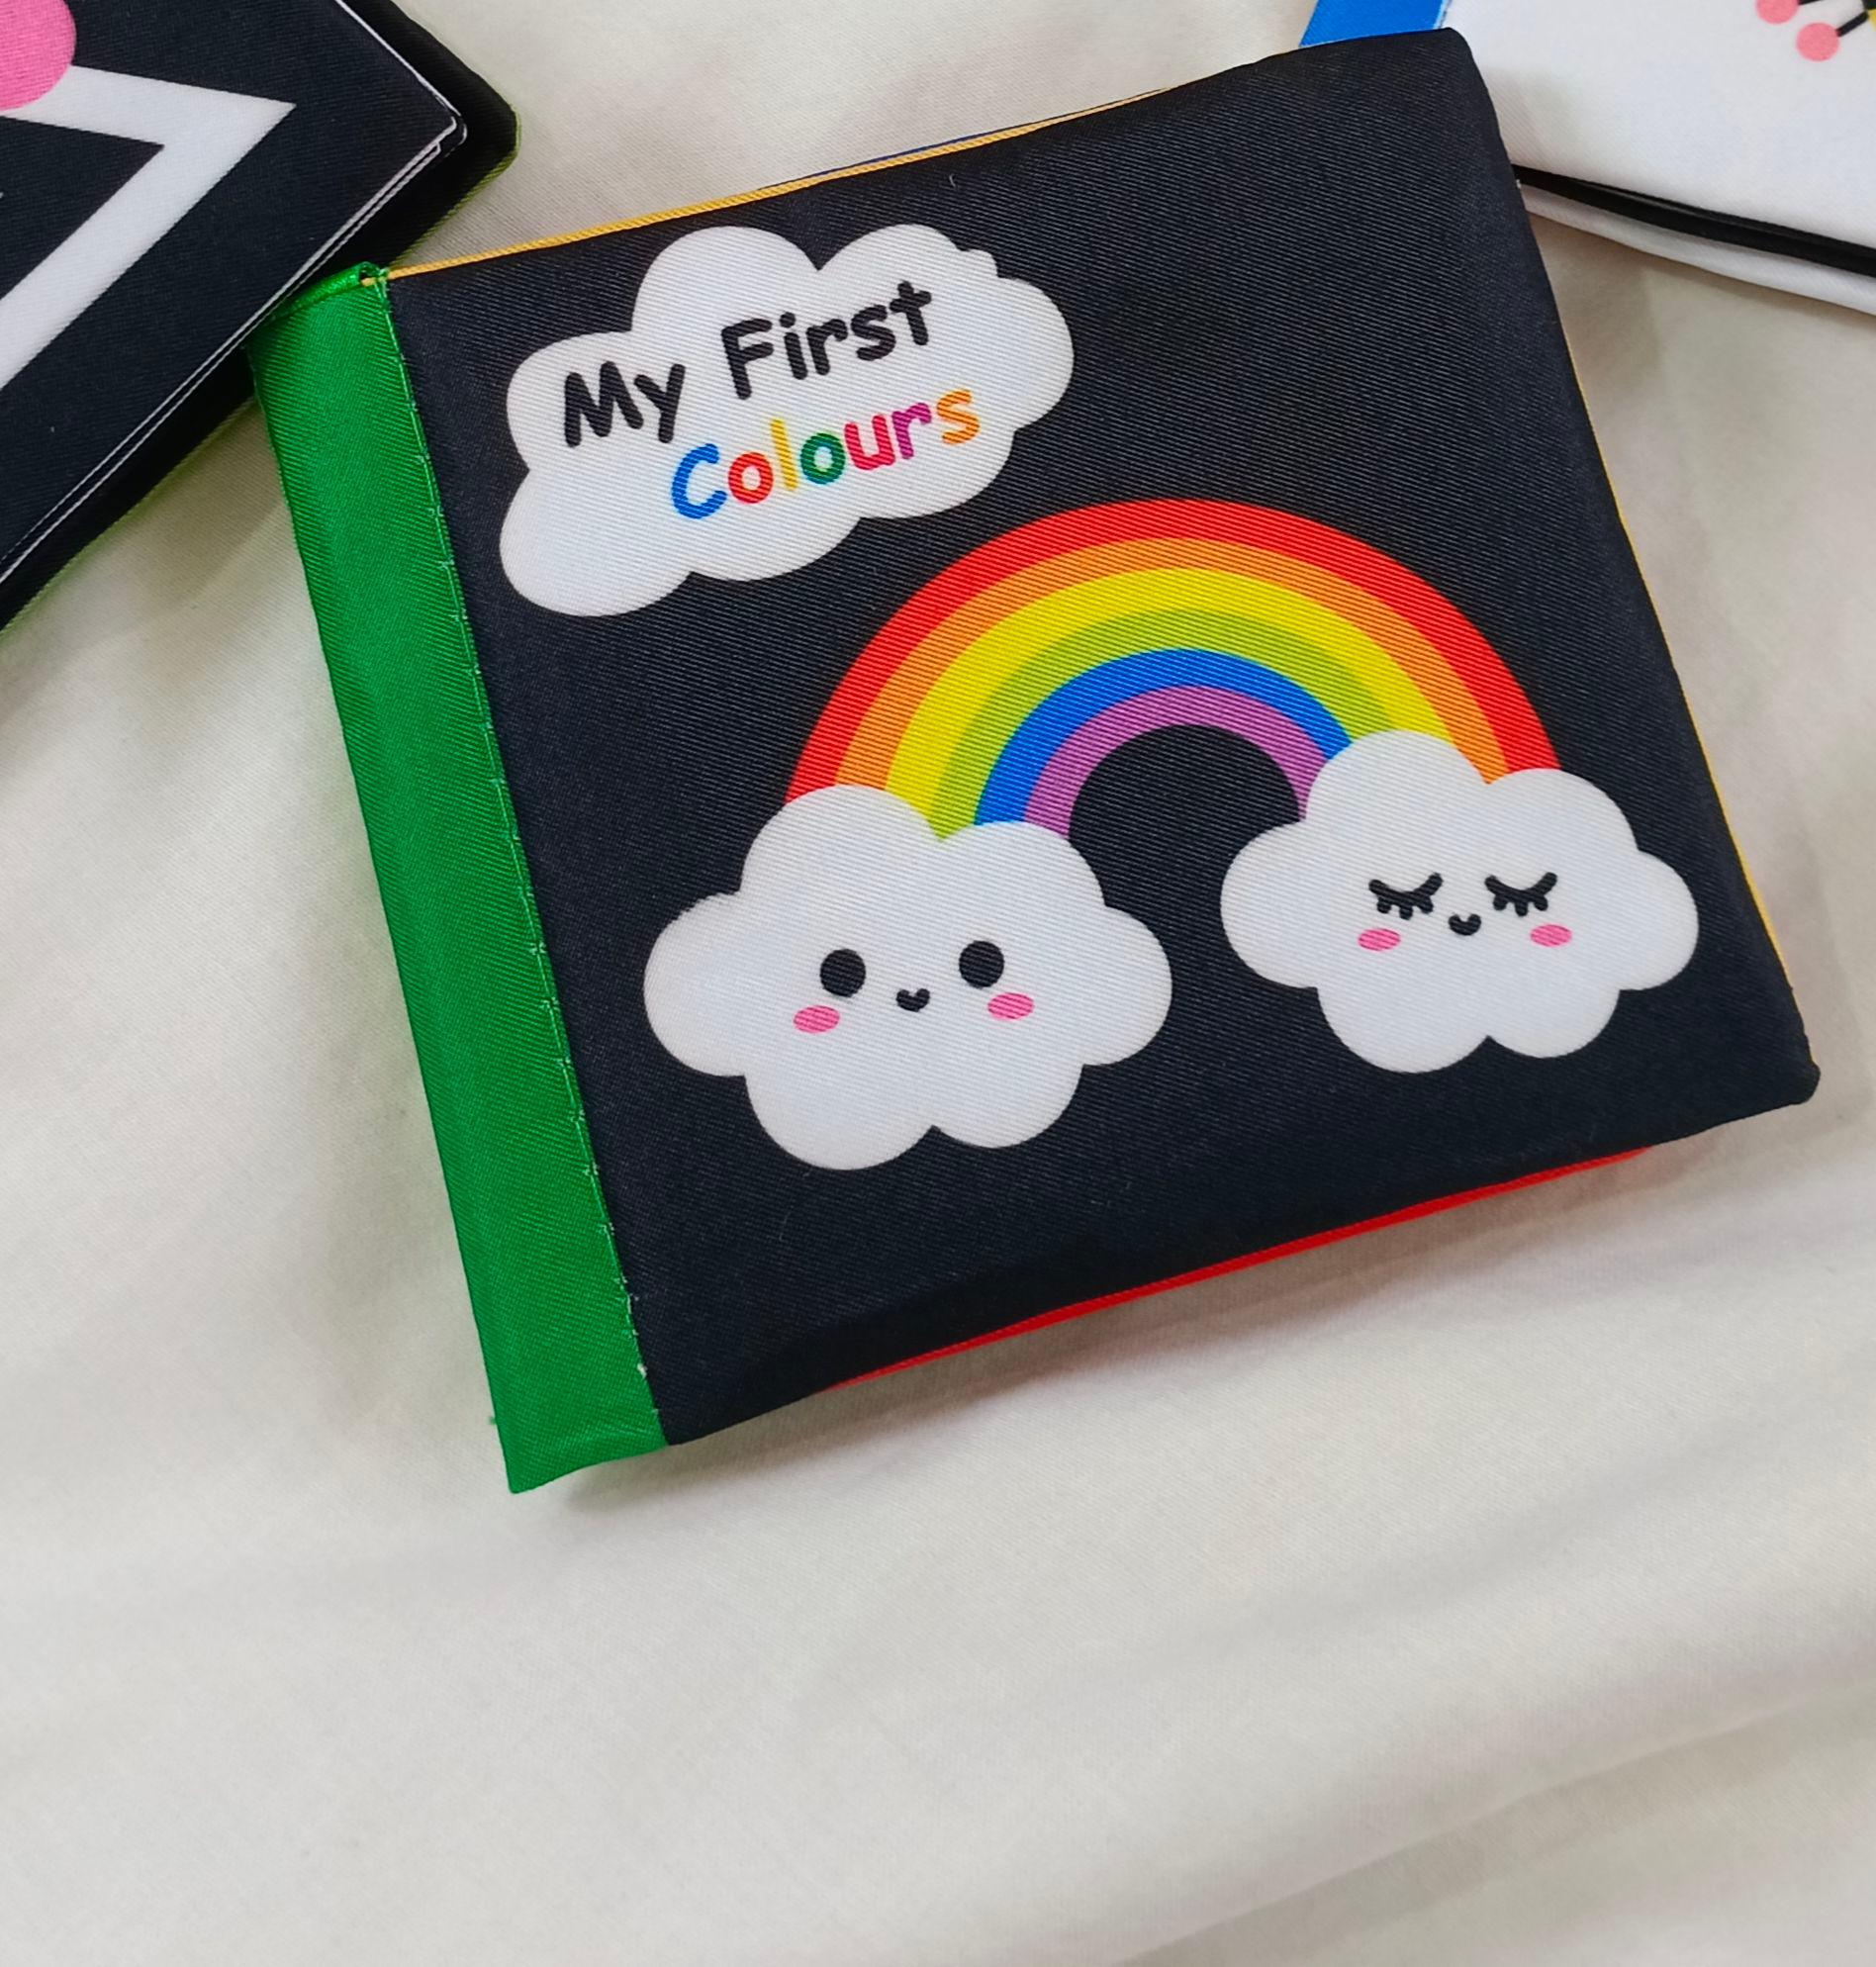 Cloth book for baby. "My First Colors" Black and White cloth book. Stimulating early learning fabric book. Cloth book with fun sound